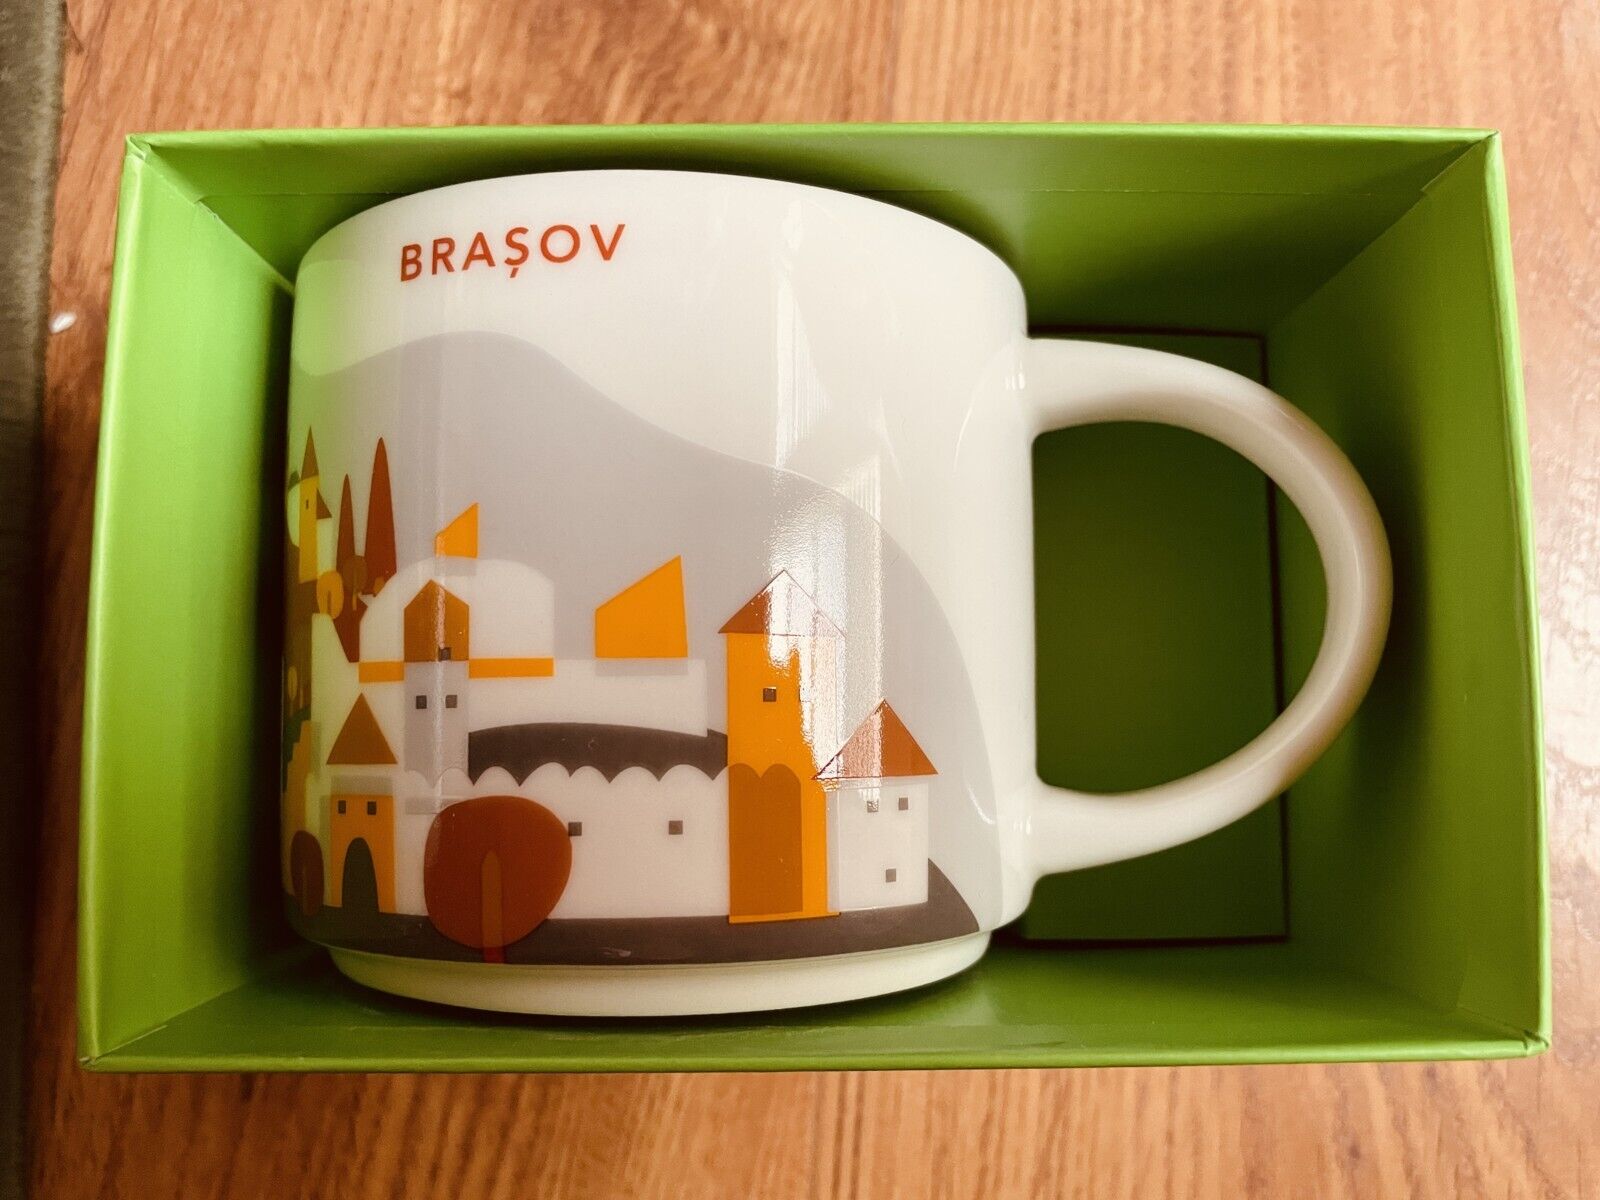 Starbucks 2013 You Are Here Collection YAH mug BRASOV or ROMANIA MINT NEW IN BOX